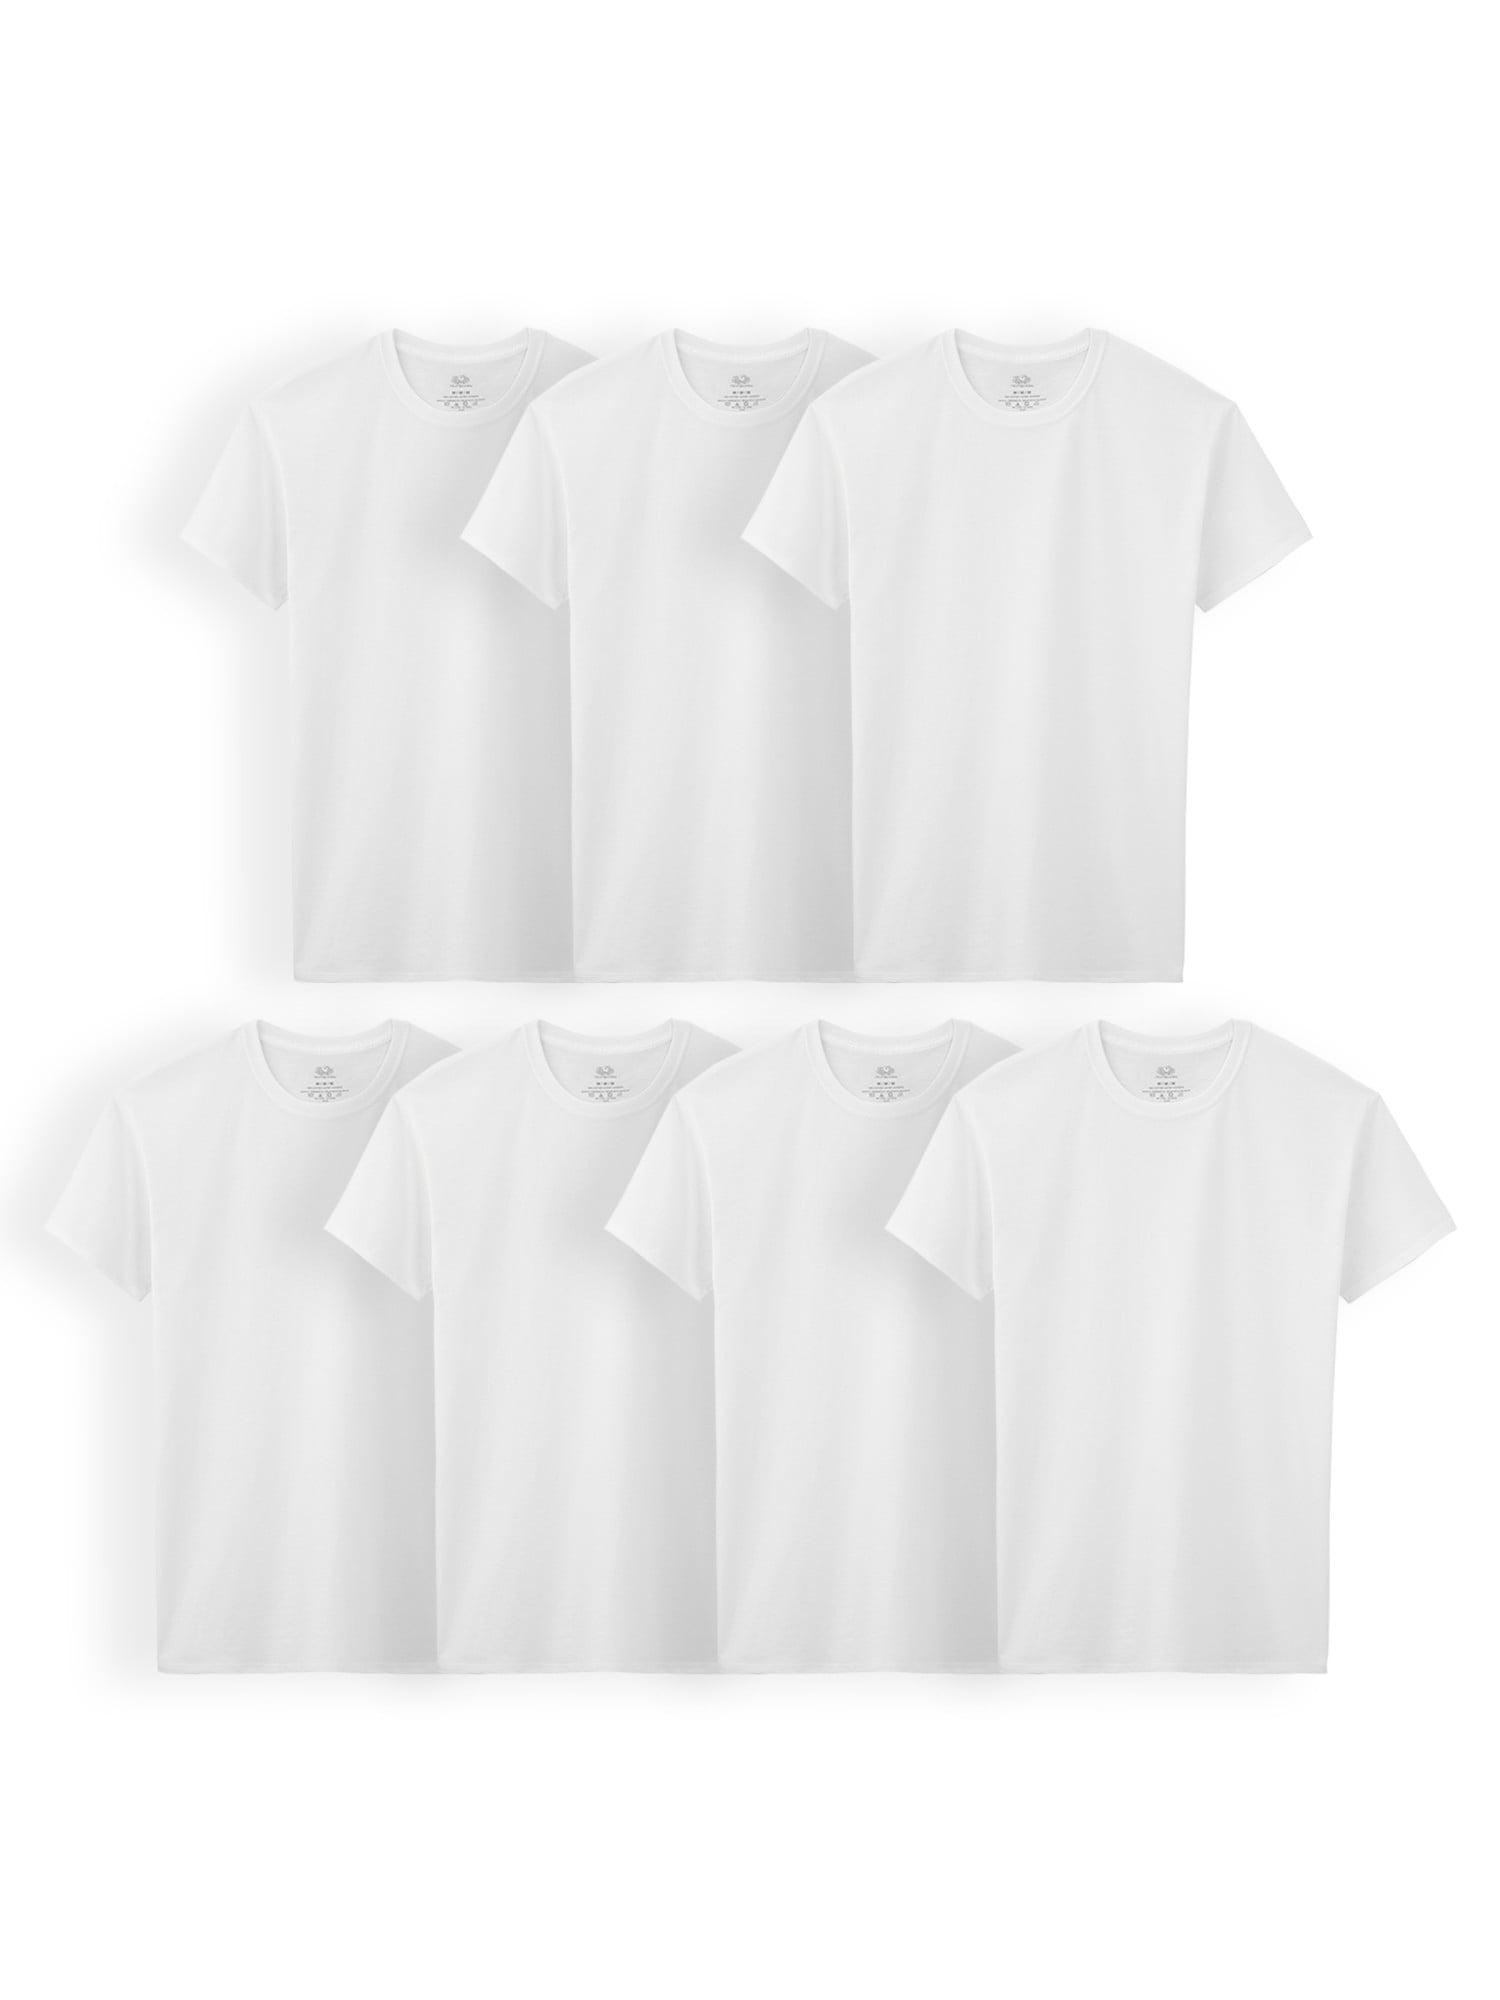 Details about  / Fruit of the Loom Boys` 3-Pack White A-Shirt